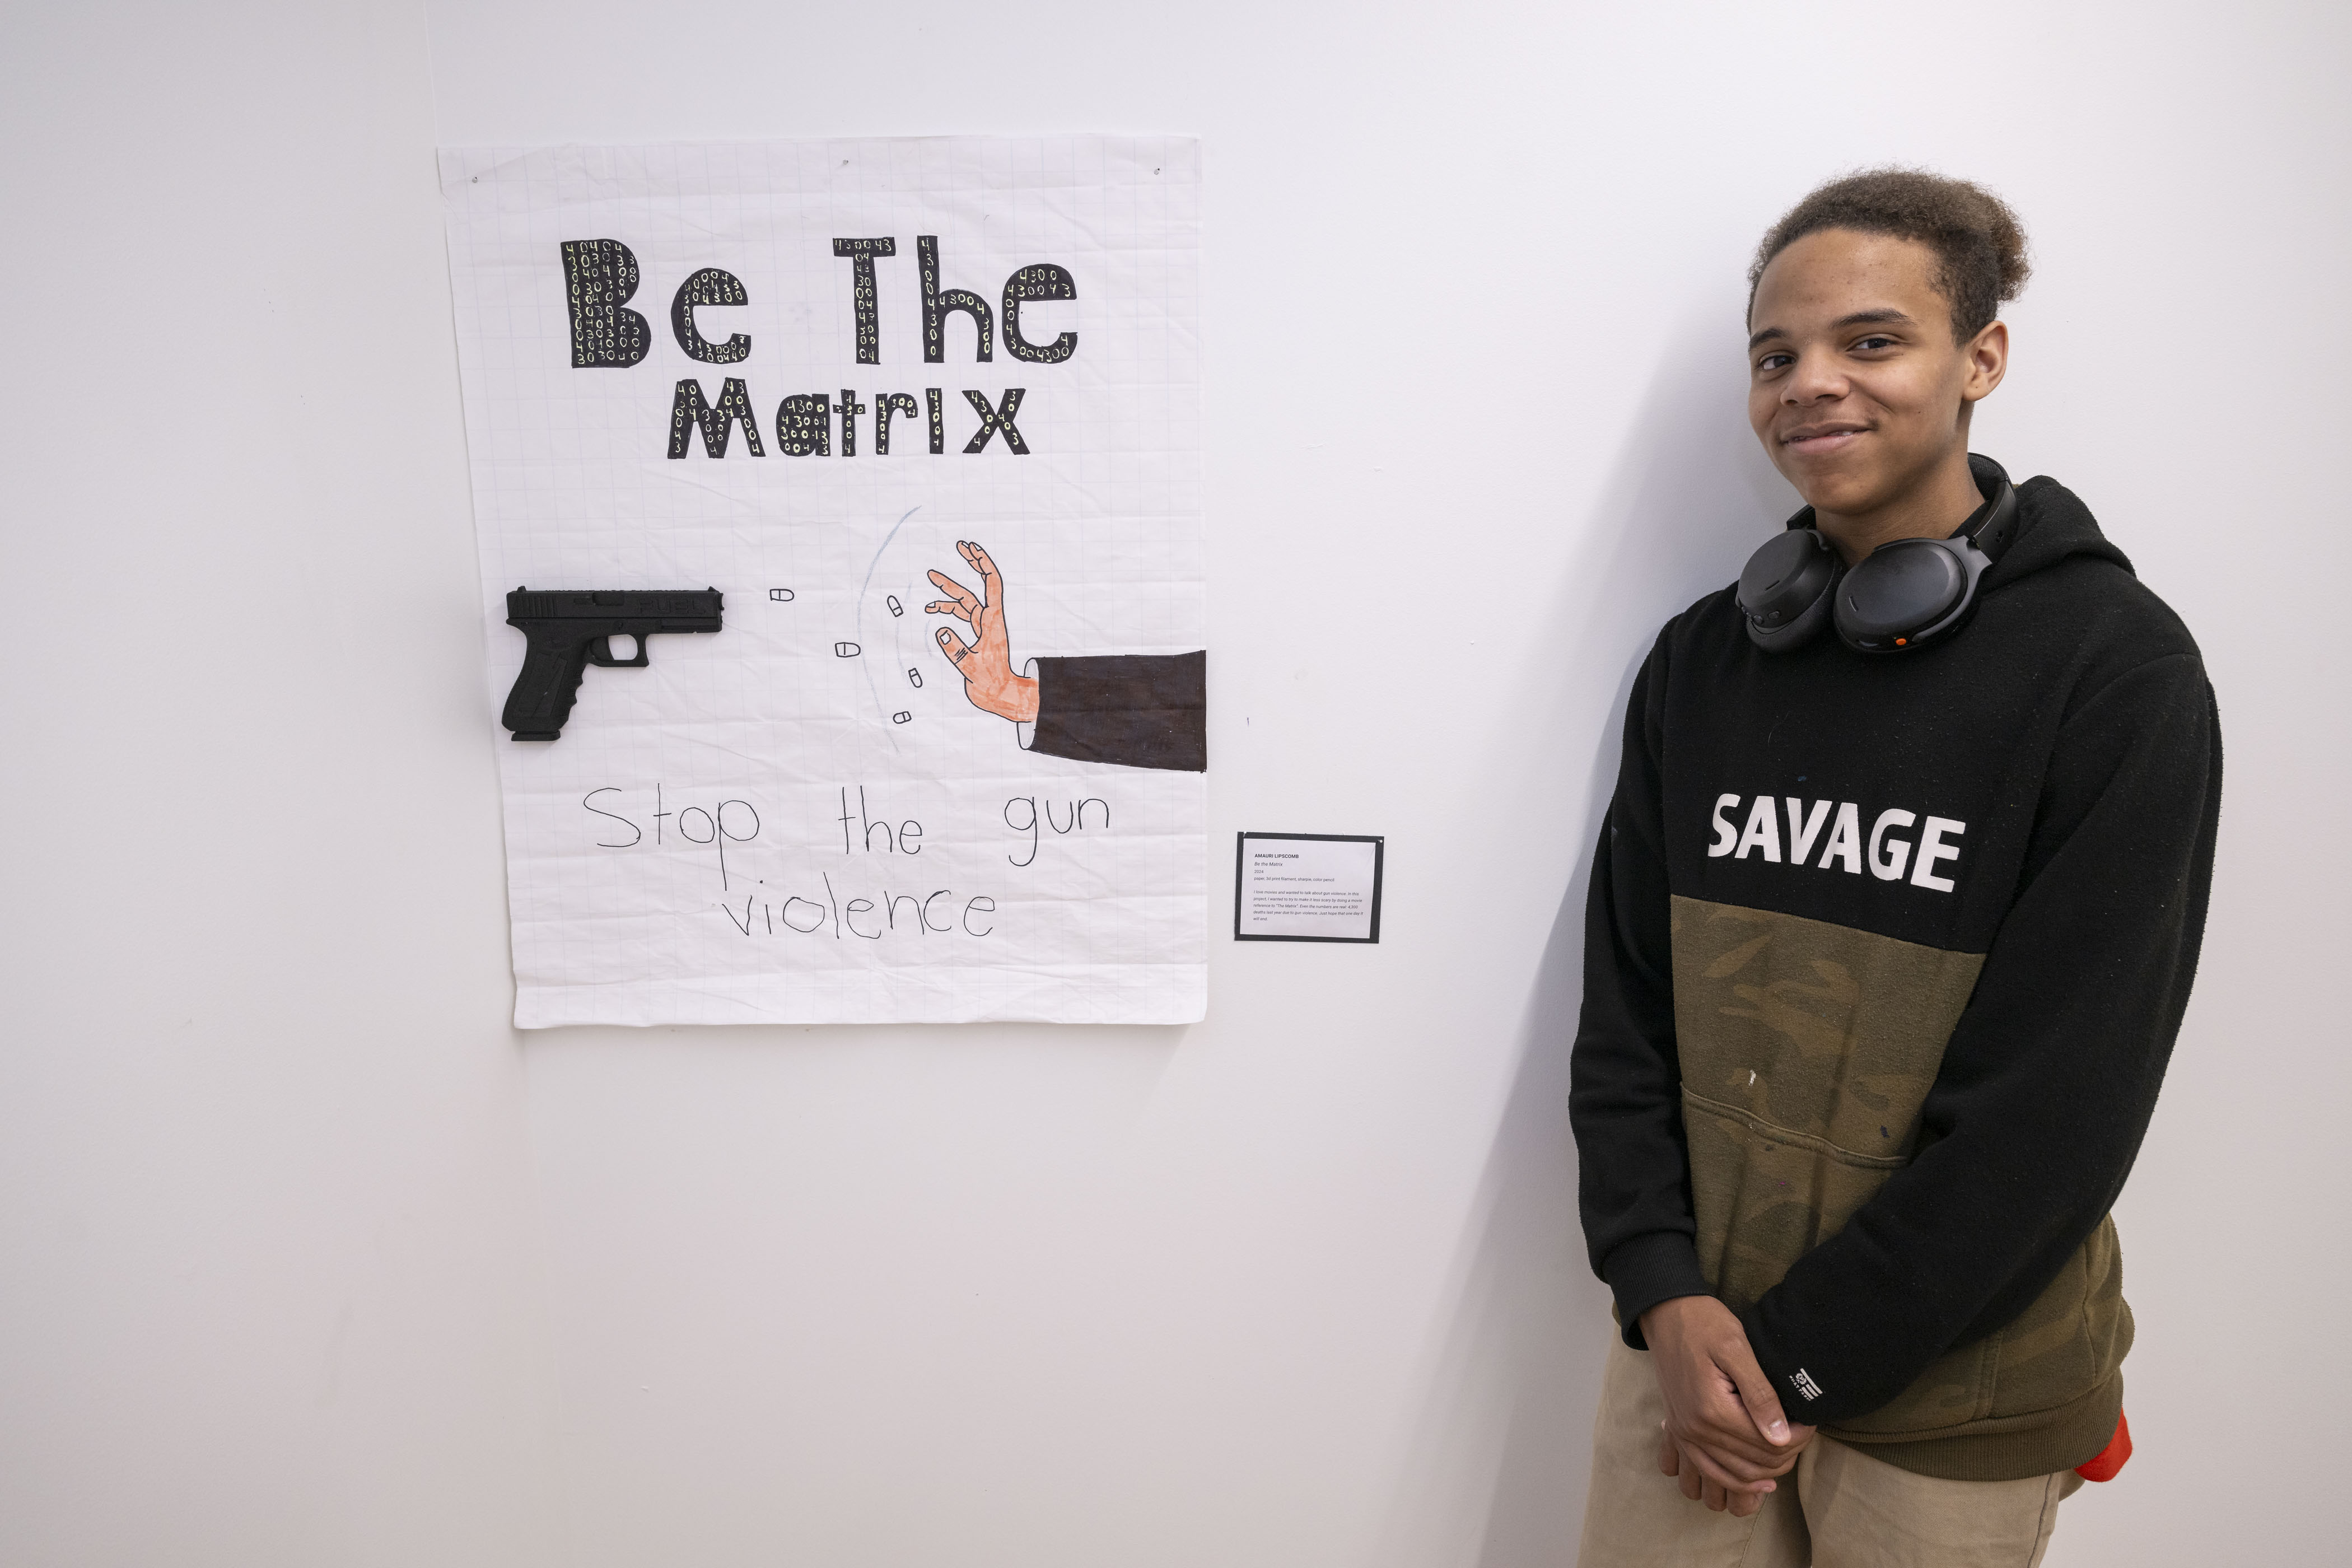 LEAP student, Amauri, standing next to a poster he drew with a 3D printed model of a gun attached to it.